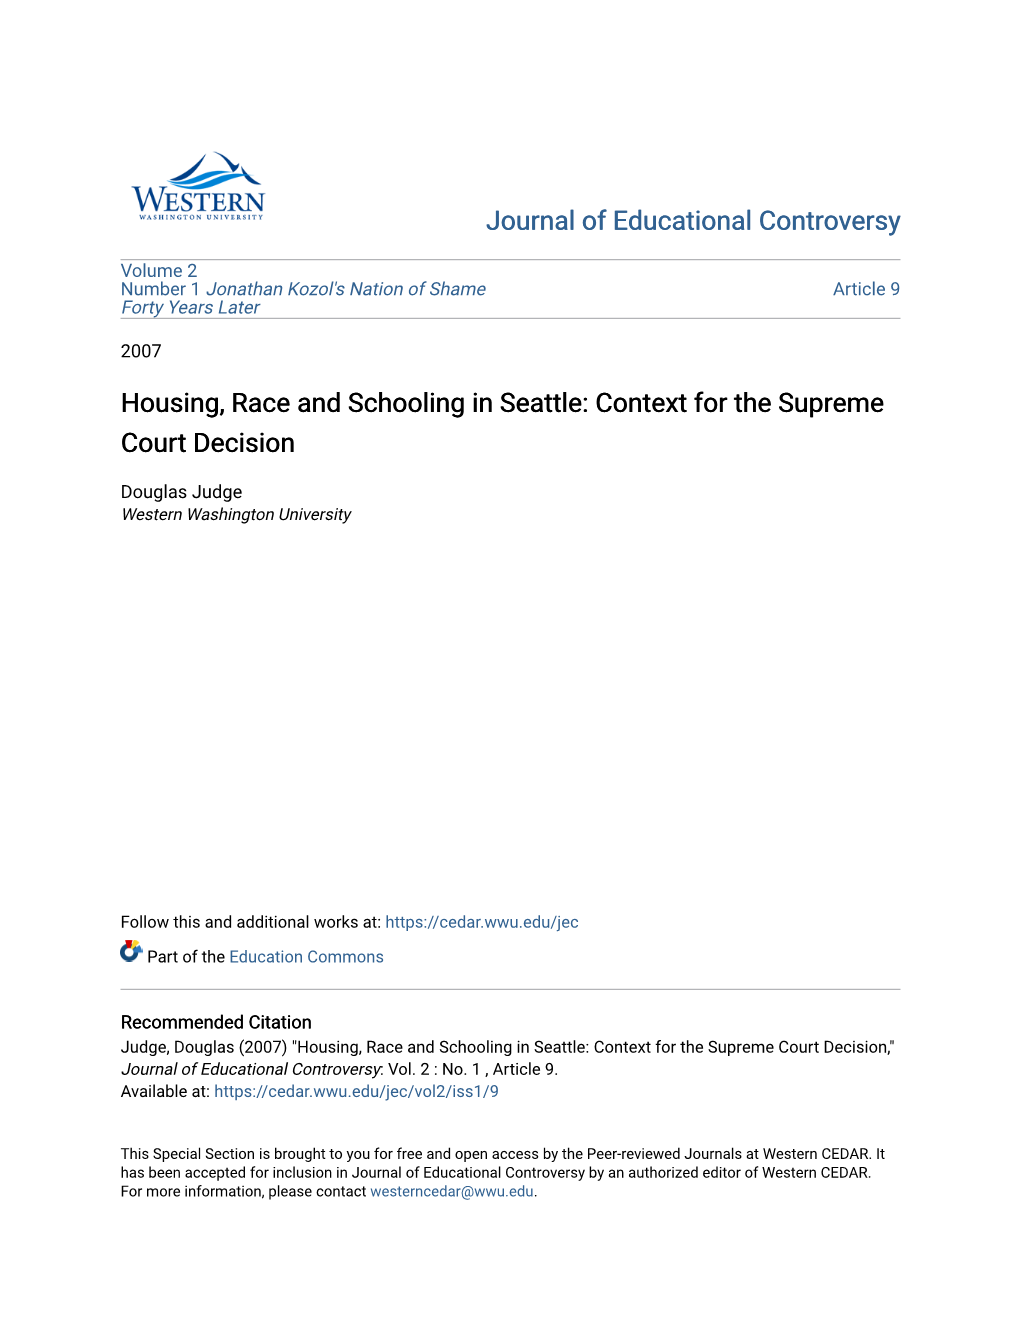 Housing, Race and Schooling in Seattle: Context for the Supreme Court Decision